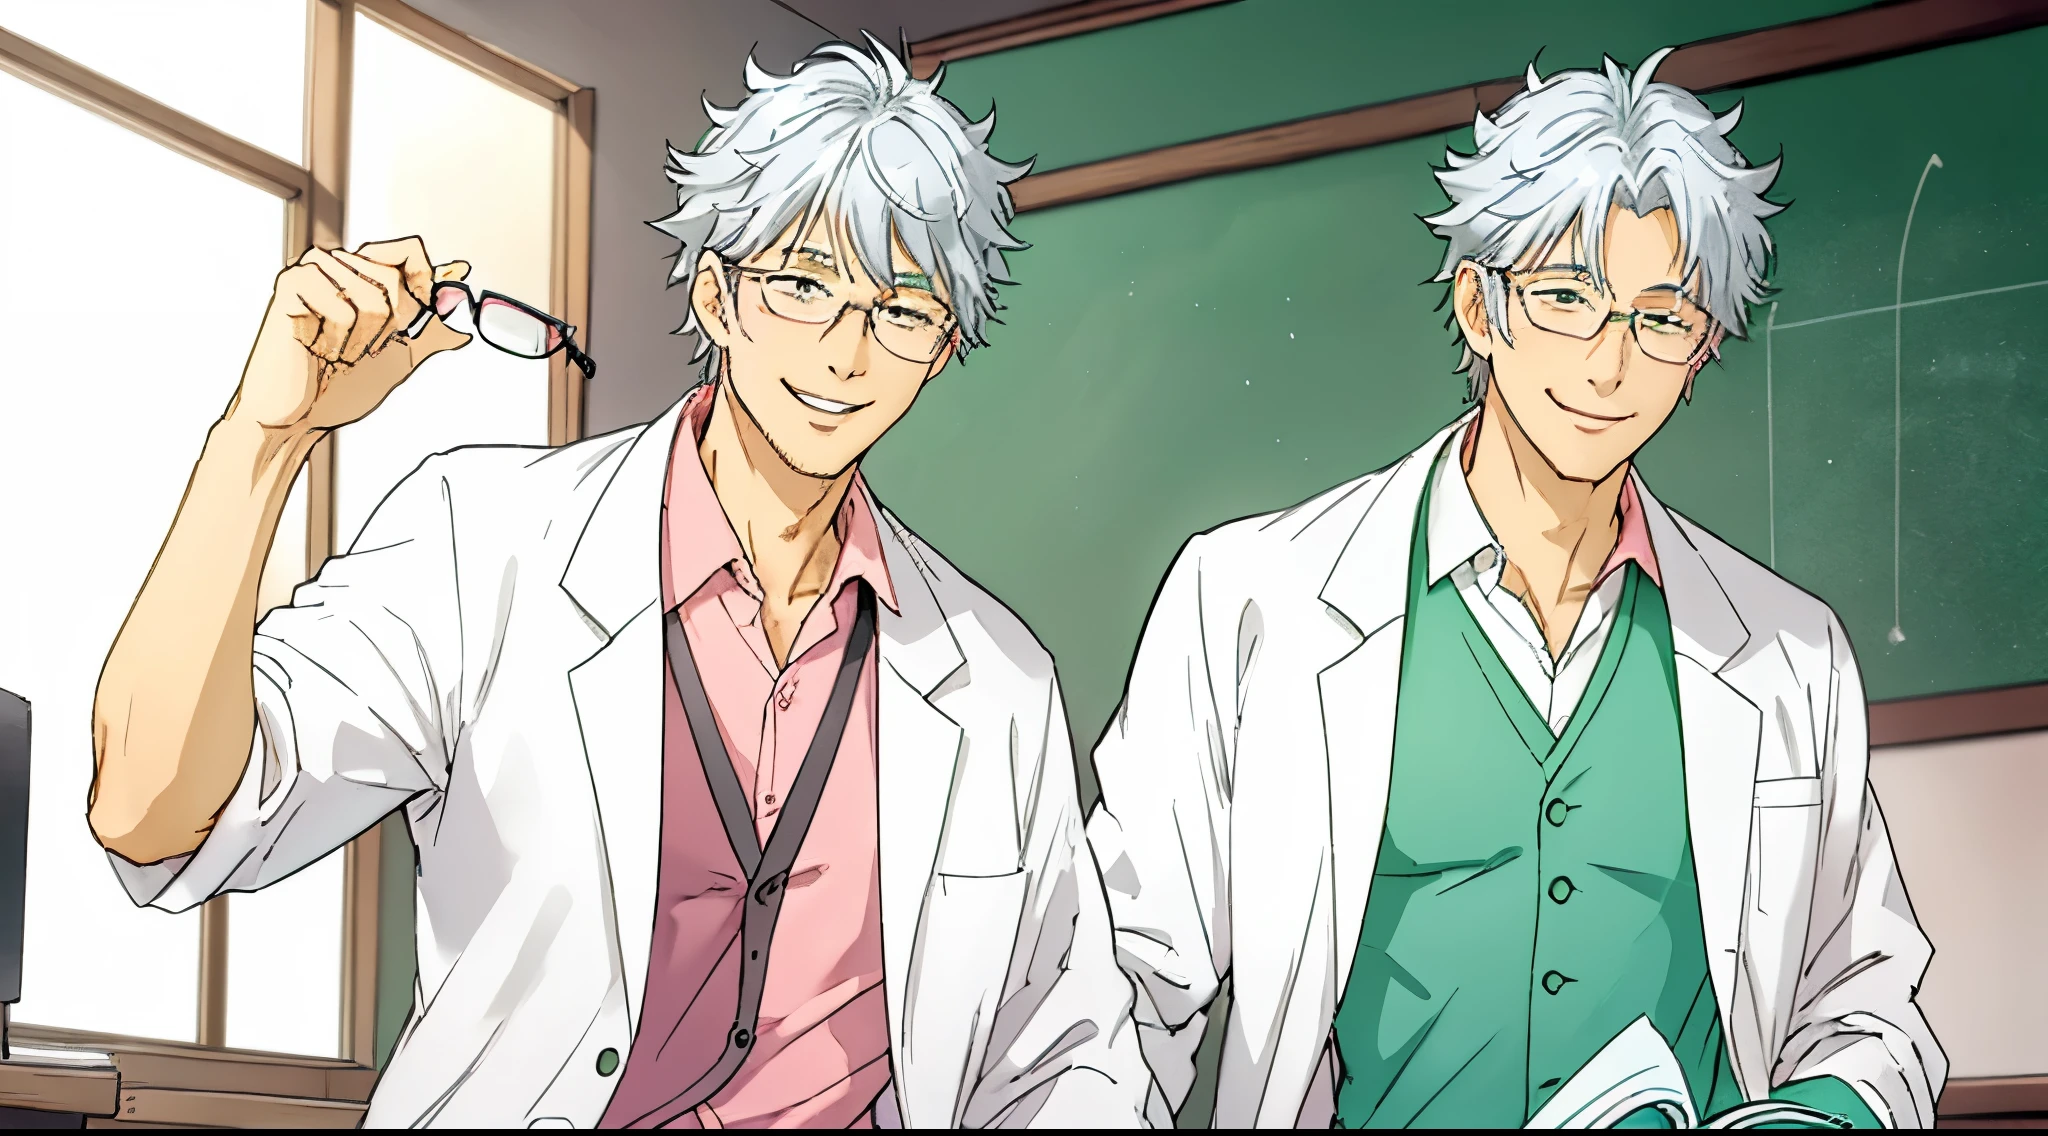 a happy teacher with a gray hair, he is wearing medical glasses, a lab coat, a green tie and a pink shirt, he is smiling